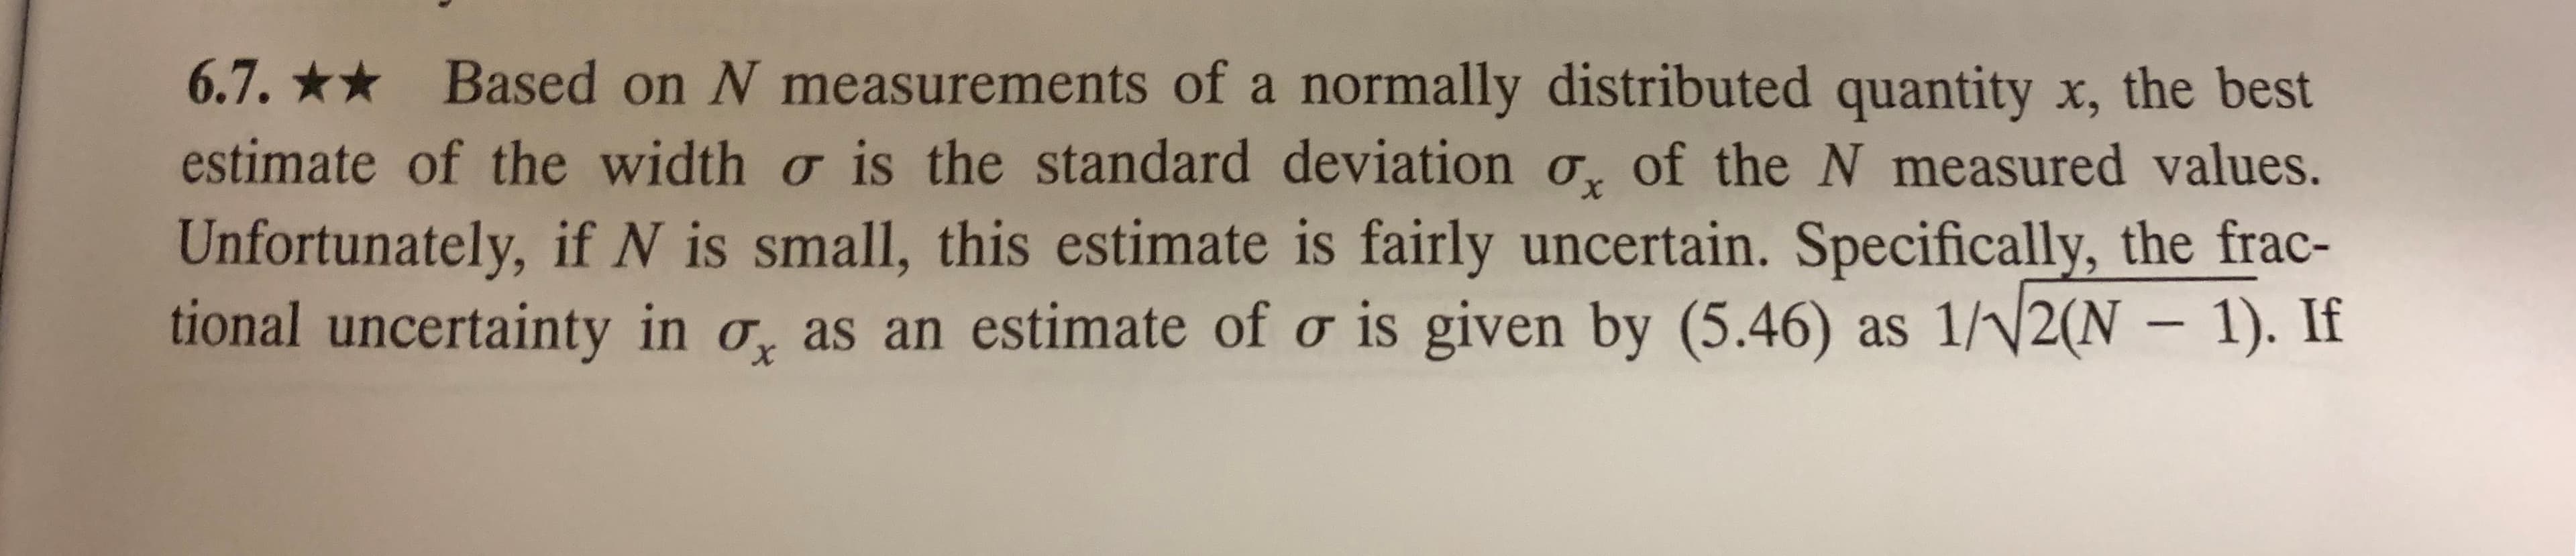 6.7. Based on N measurements of a normally distributed quantity x, the best
estimate of the width o is the standard deviation o, of the N measured values.
Unfortunately, if N is small, this estimate is fairly uncertain. Specifically, the frac-
tional uncertainty in o as an estimate of o is given by (5.46) as 1/2(N 1). If
X
X
